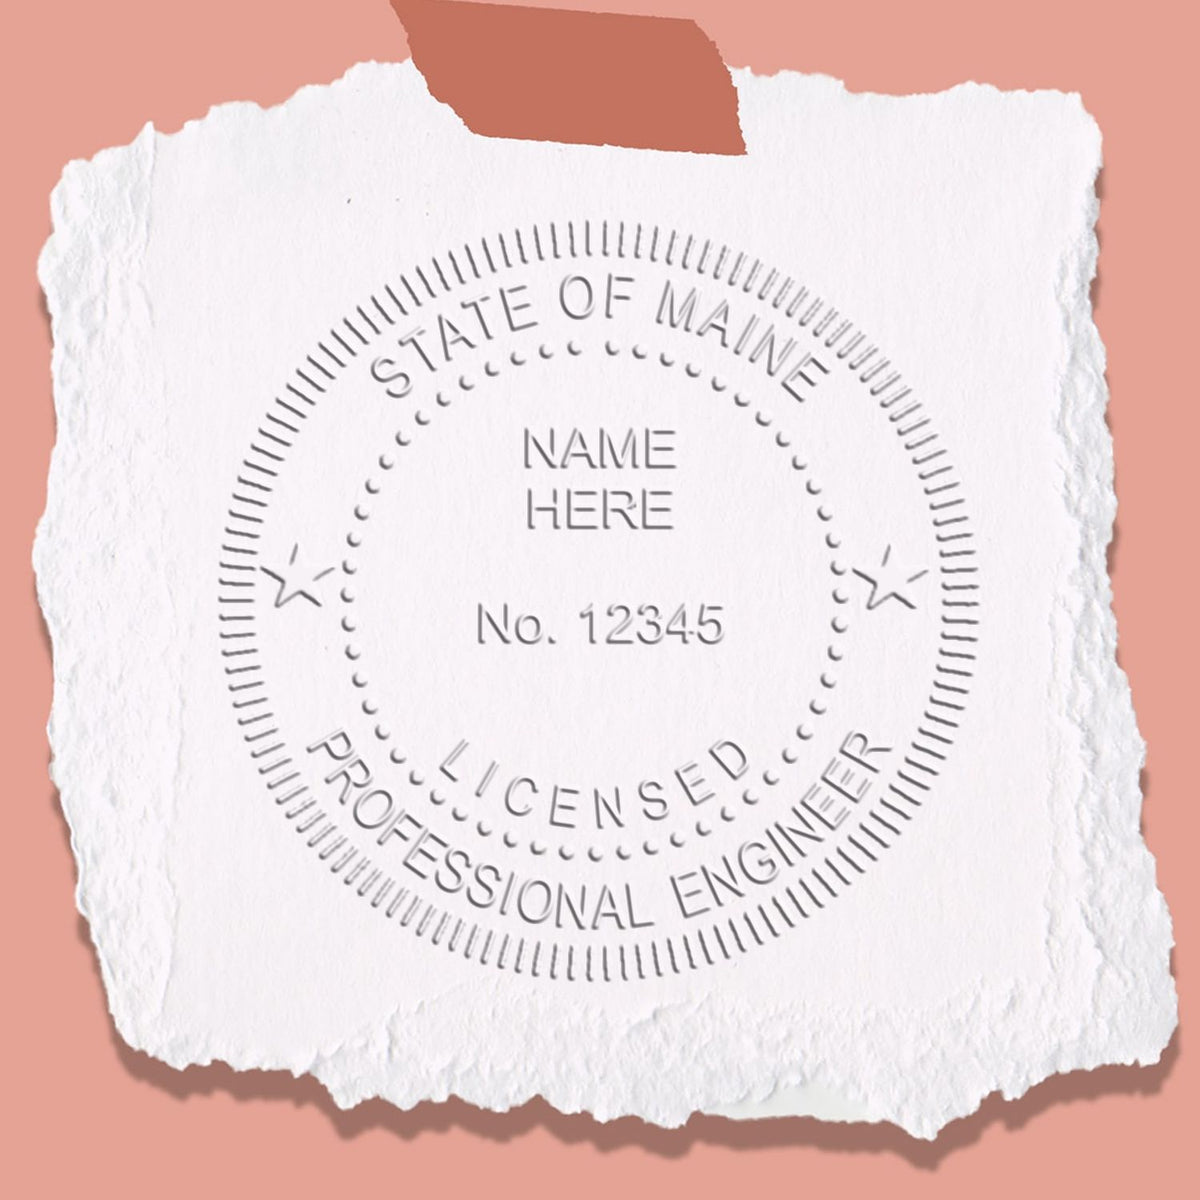 An in use photo of the Hybrid Maine Engineer Seal showing a sample imprint on a cardstock